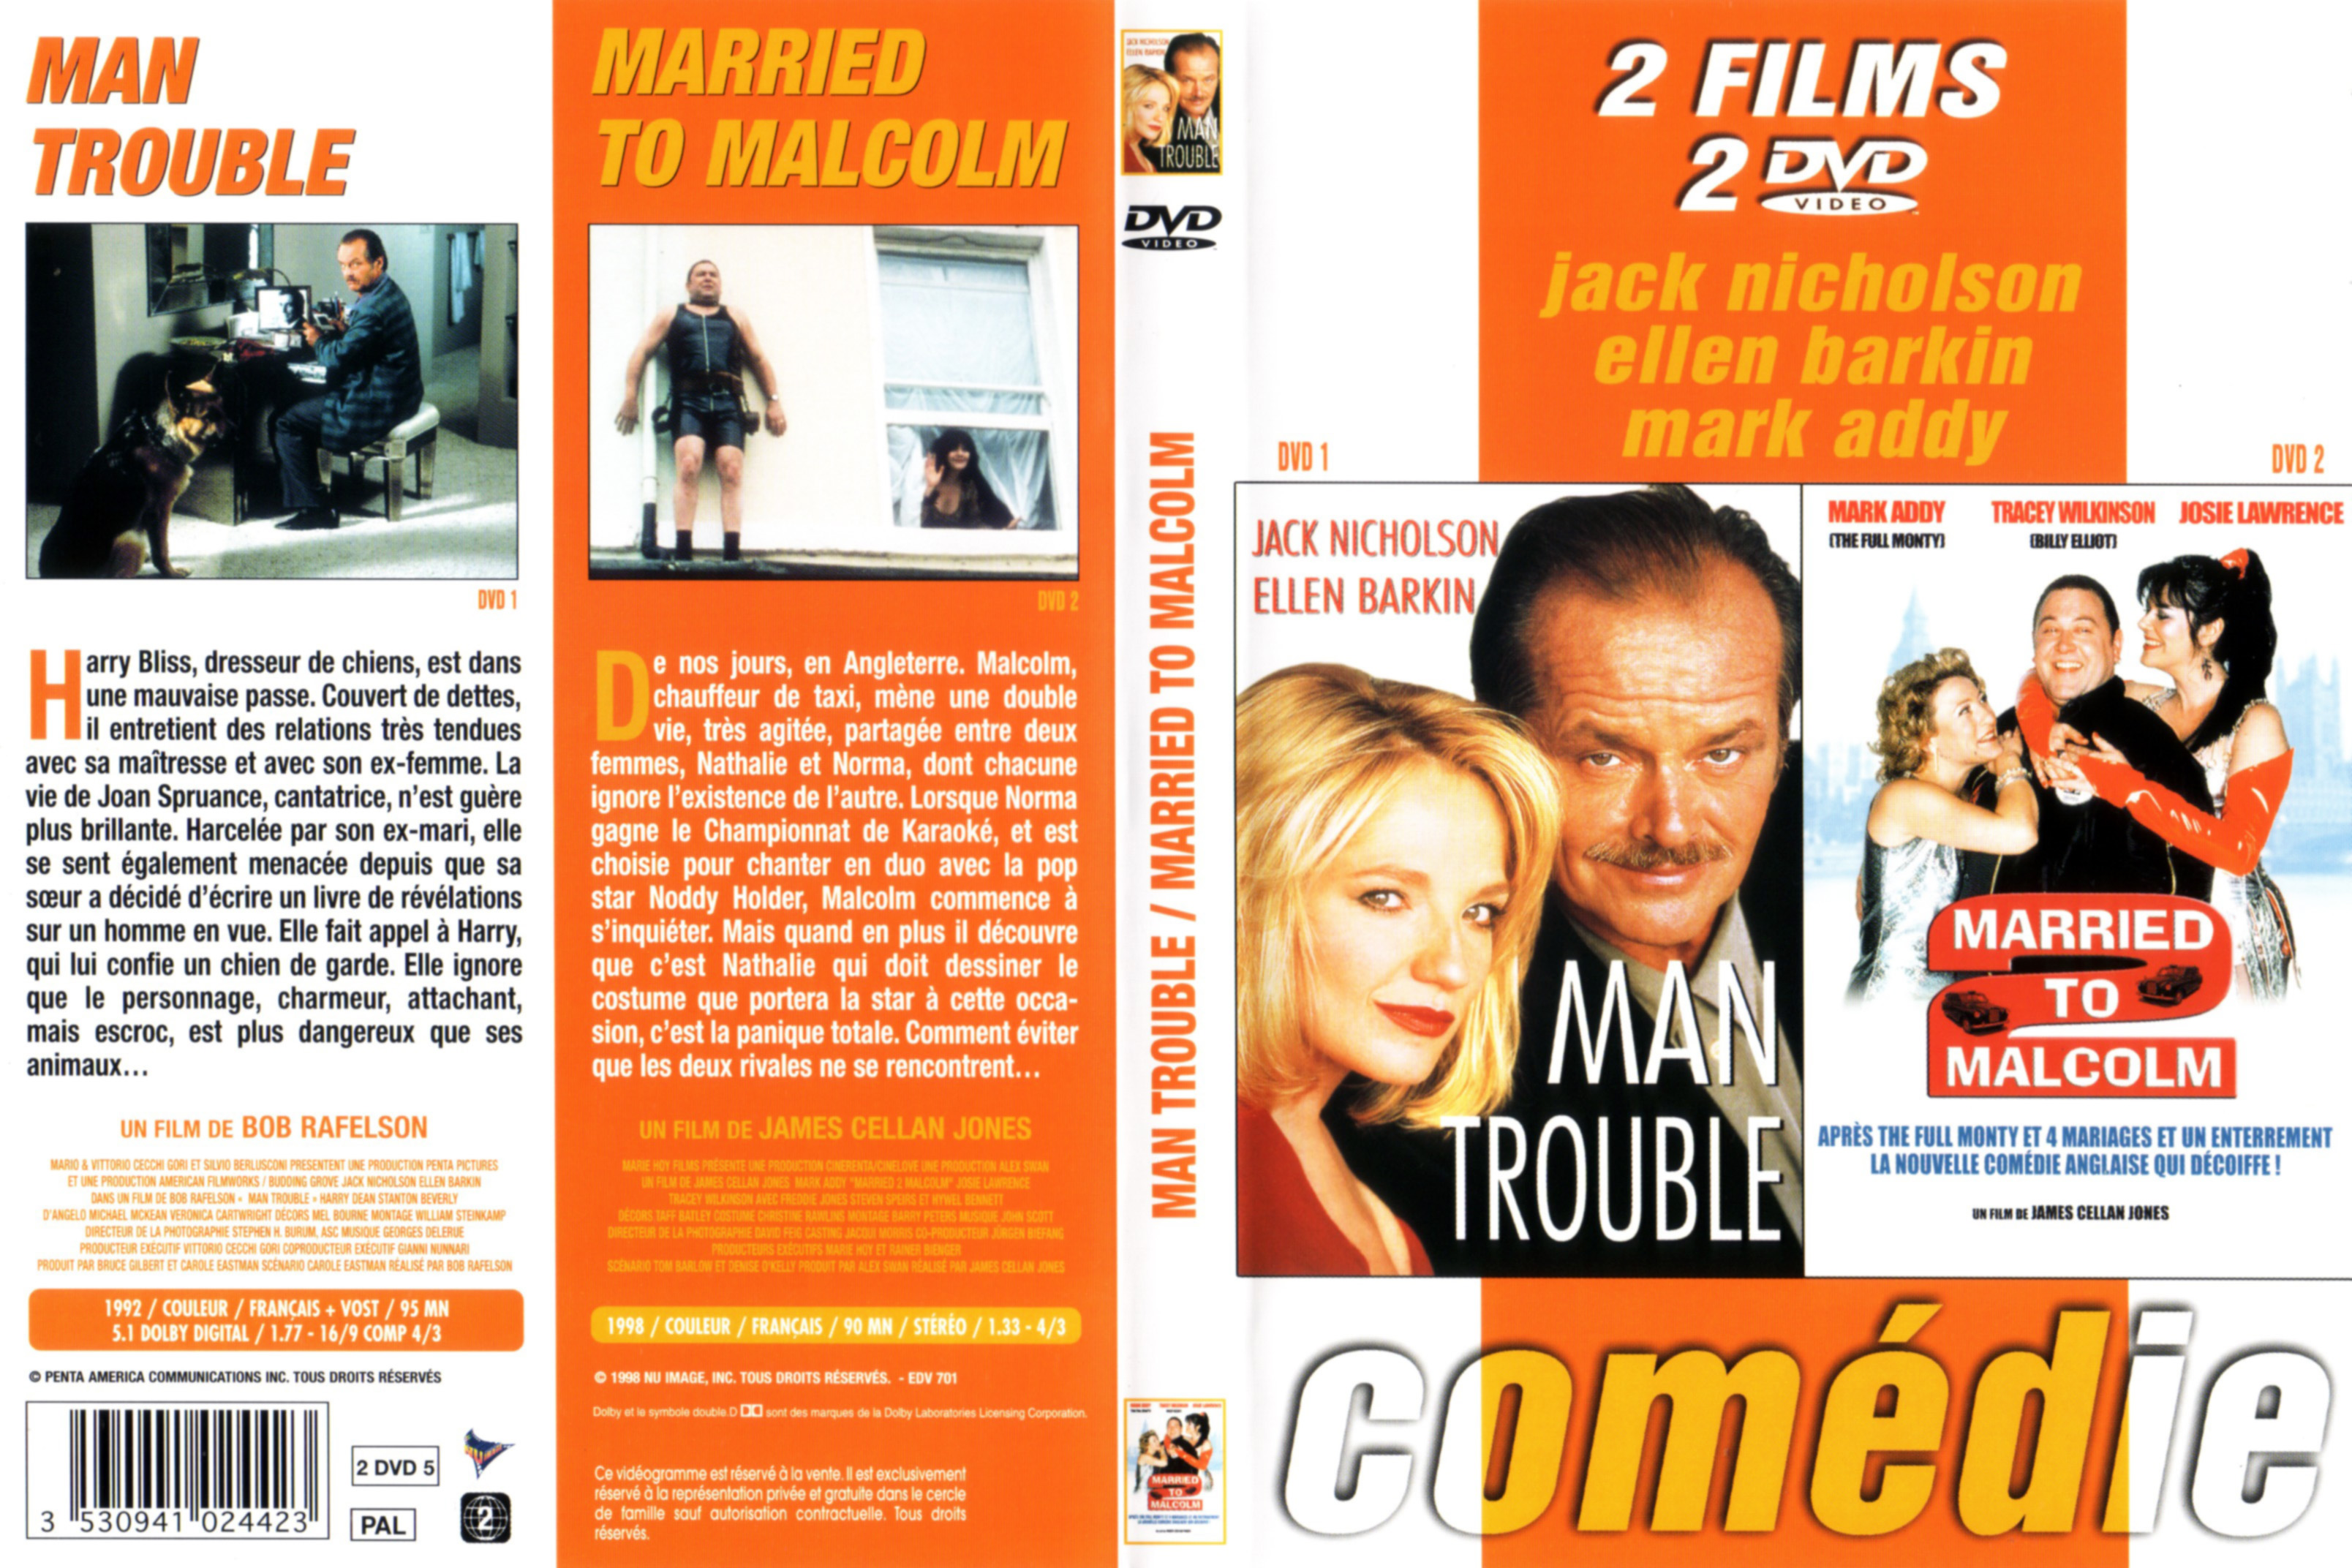 Jaquette DVD Man trouble + Married to Malcolm